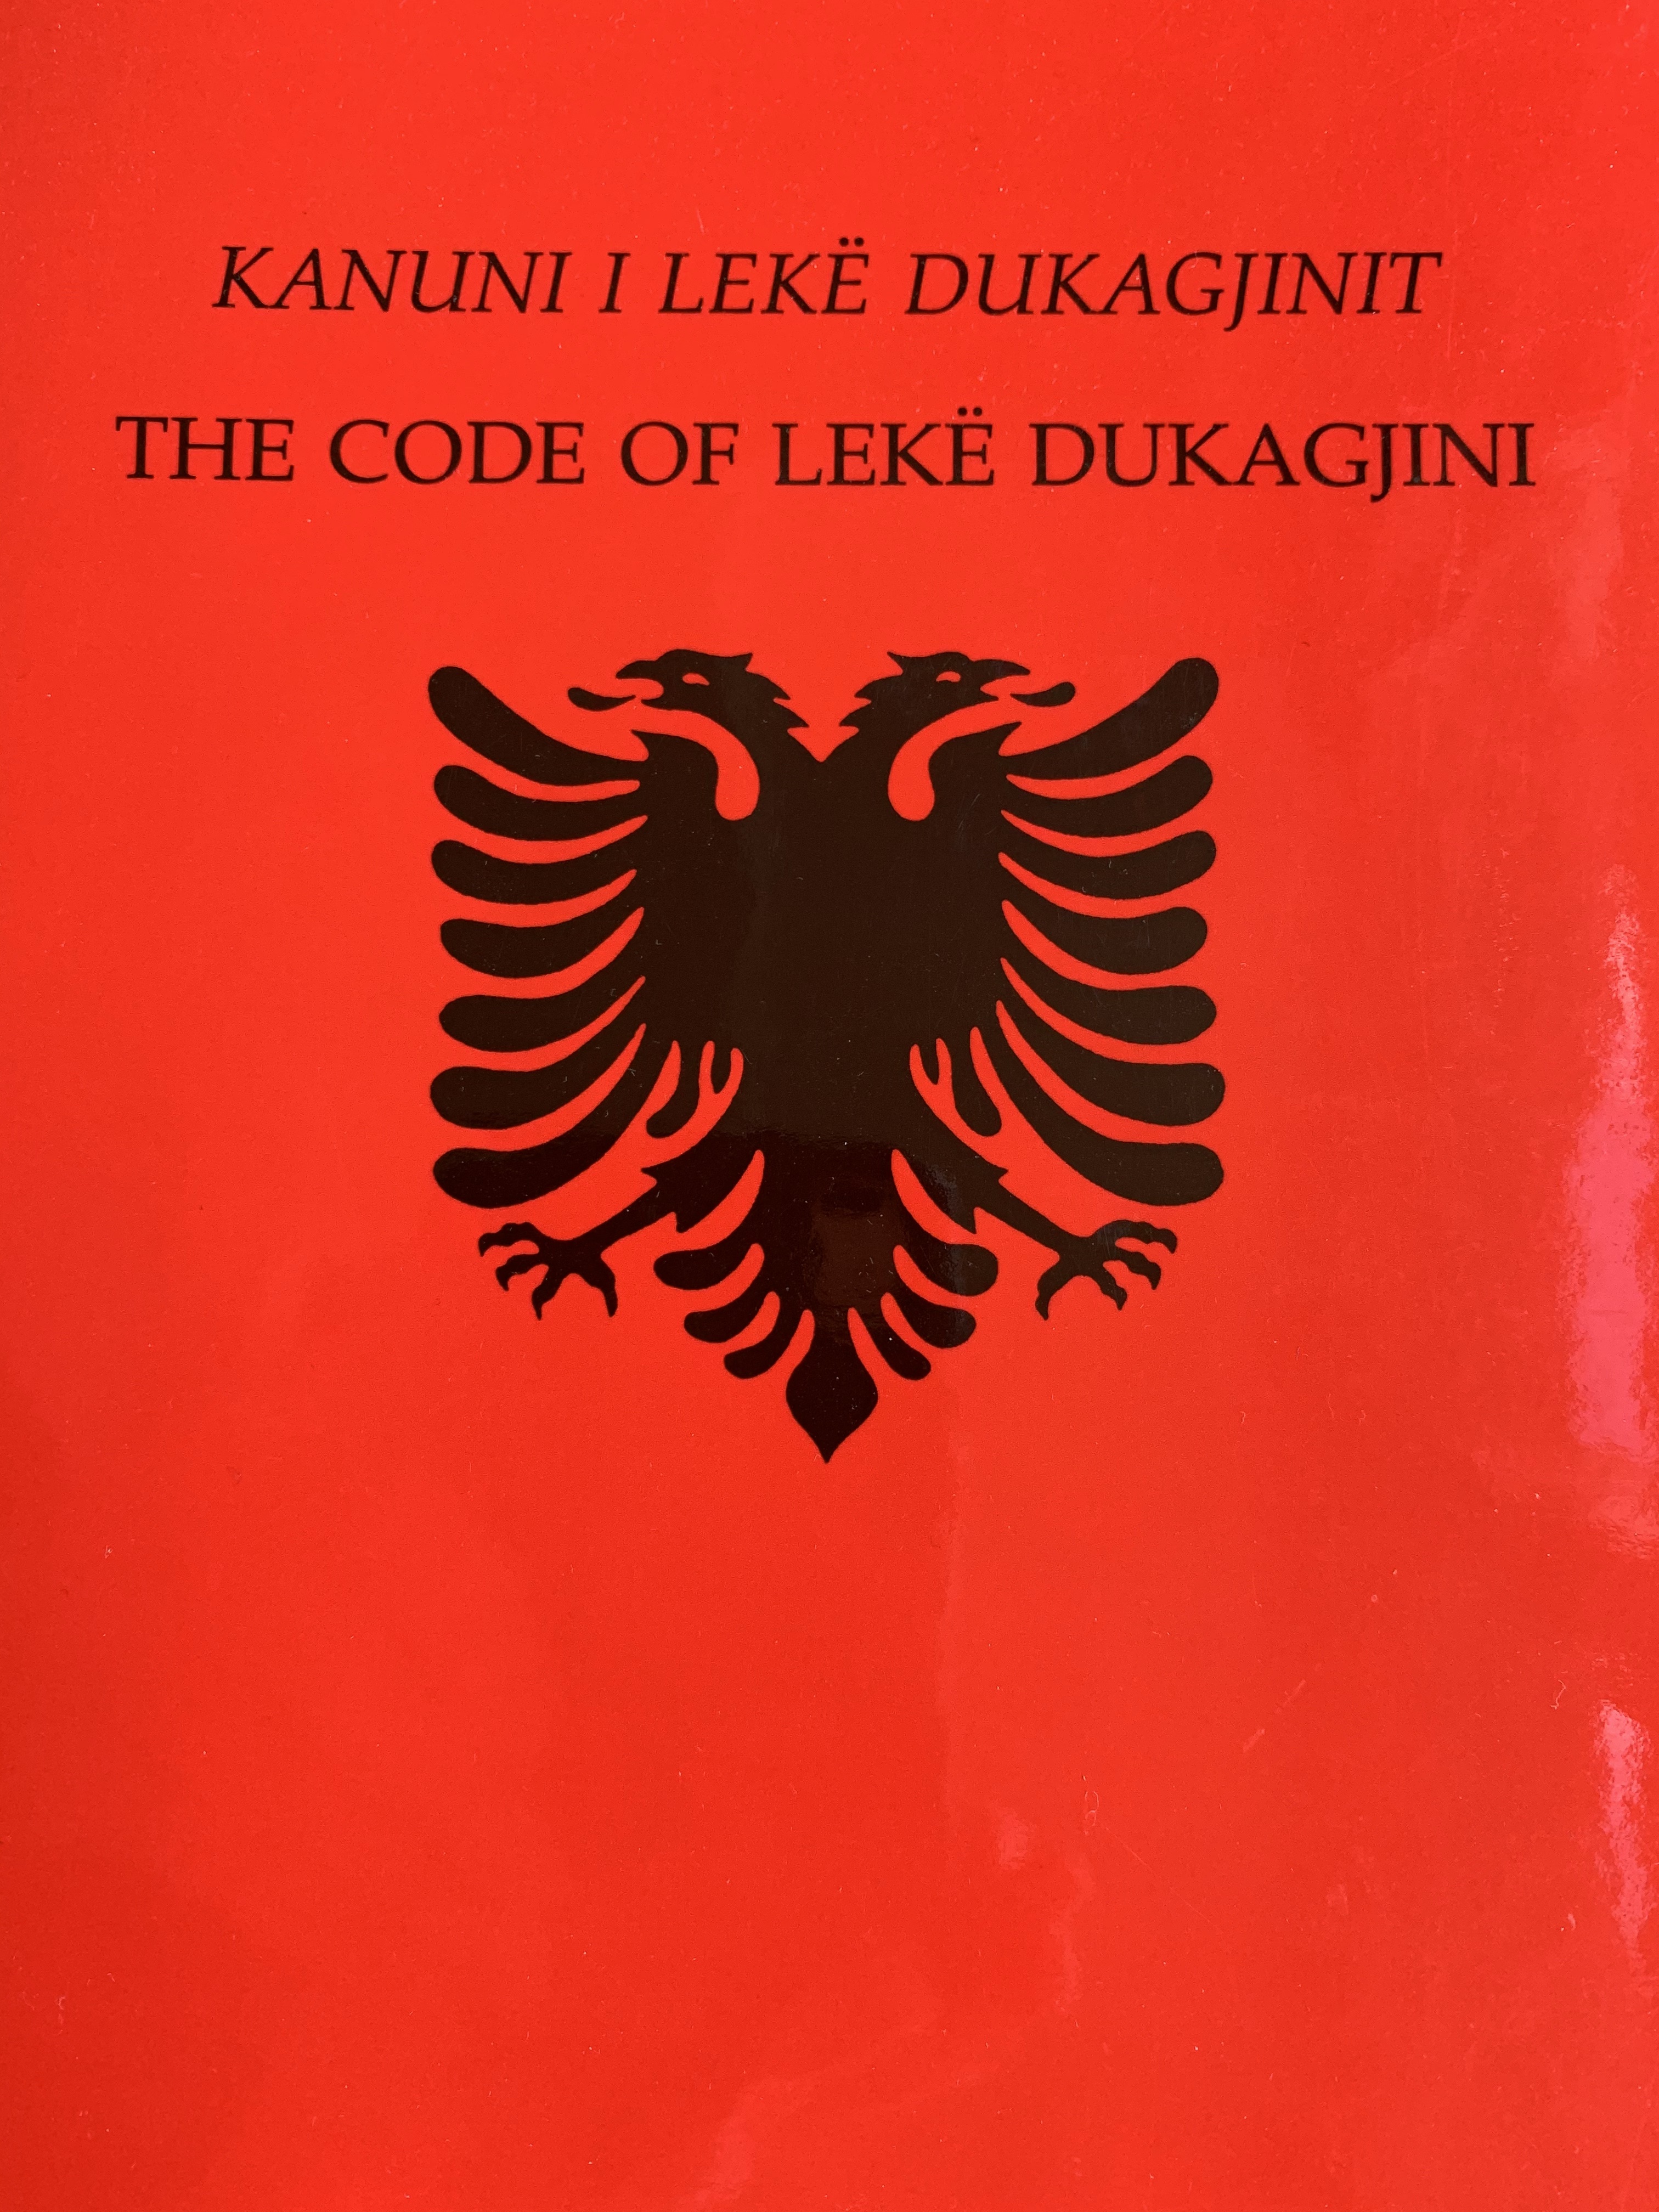 Book cover of the Kanun (common law and obligations codified by the fifteenth century Albanian Prince, Lekë Dukagjini)